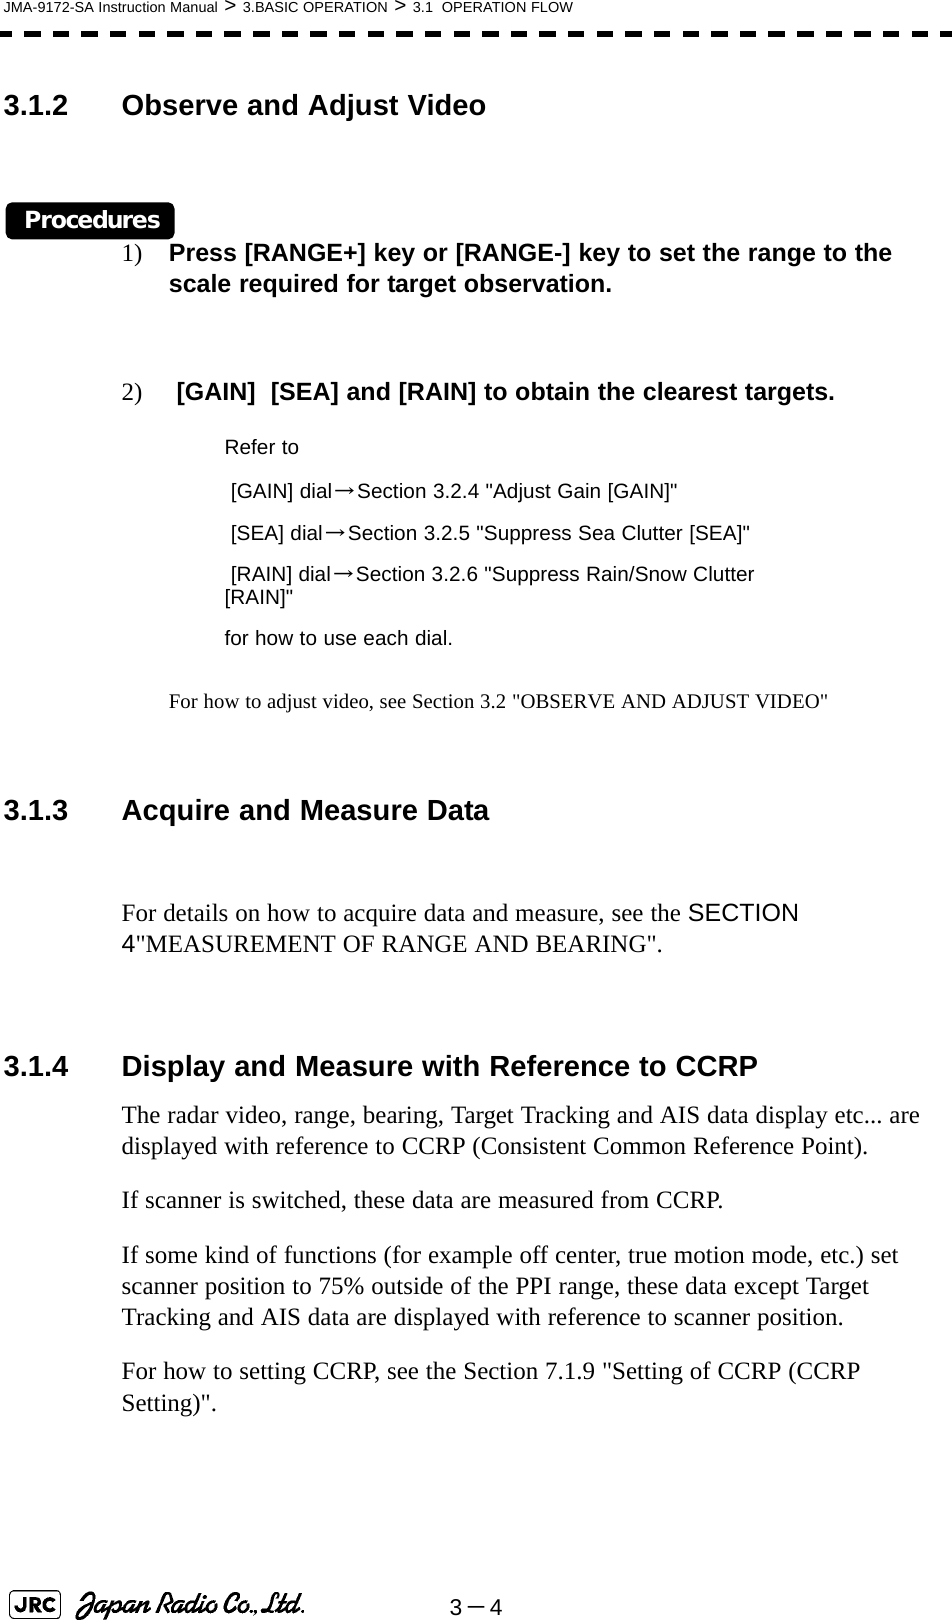 3－4JMA-9172-SA Instruction Manual &gt; 3.BASIC OPERATION &gt; 3.1  OPERATION FLOW3.1.2 Observe and Adjust VideoProcedures1) Press [RANGE+] key or [RANGE-] key to set the range to the scale required for target observation.2)  [GAIN]  [SEA] and [RAIN] to obtain the clearest targets.For how to adjust video, see Section 3.2 &quot;OBSERVE AND ADJUST VIDEO&quot; 3.1.3 Acquire and Measure DataFor details on how to acquire data and measure, see the SECTION 4&quot;MEASUREMENT OF RANGE AND BEARING&quot;.3.1.4 Display and Measure with Reference to CCRPThe radar video, range, bearing, Target Tracking and AIS data display etc... are displayed with reference to CCRP (Consistent Common Reference Point).If scanner is switched, these data are measured from CCRP.If some kind of functions (for example off center, true motion mode, etc.) set scanner position to 75% outside of the PPI range, these data except Target Tracking and AIS data are displayed with reference to scanner position.For how to setting CCRP, see the Section 7.1.9 &quot;Setting of CCRP (CCRP Setting)&quot;. Refer to [GAIN] dial→Section 3.2.4 &quot;Adjust Gain [GAIN]&quot; [SEA] dial→Section 3.2.5 &quot;Suppress Sea Clutter [SEA]&quot; [RAIN] dial→Section 3.2.6 &quot;Suppress Rain/Snow Clutter [RAIN]&quot;for how to use each dial.